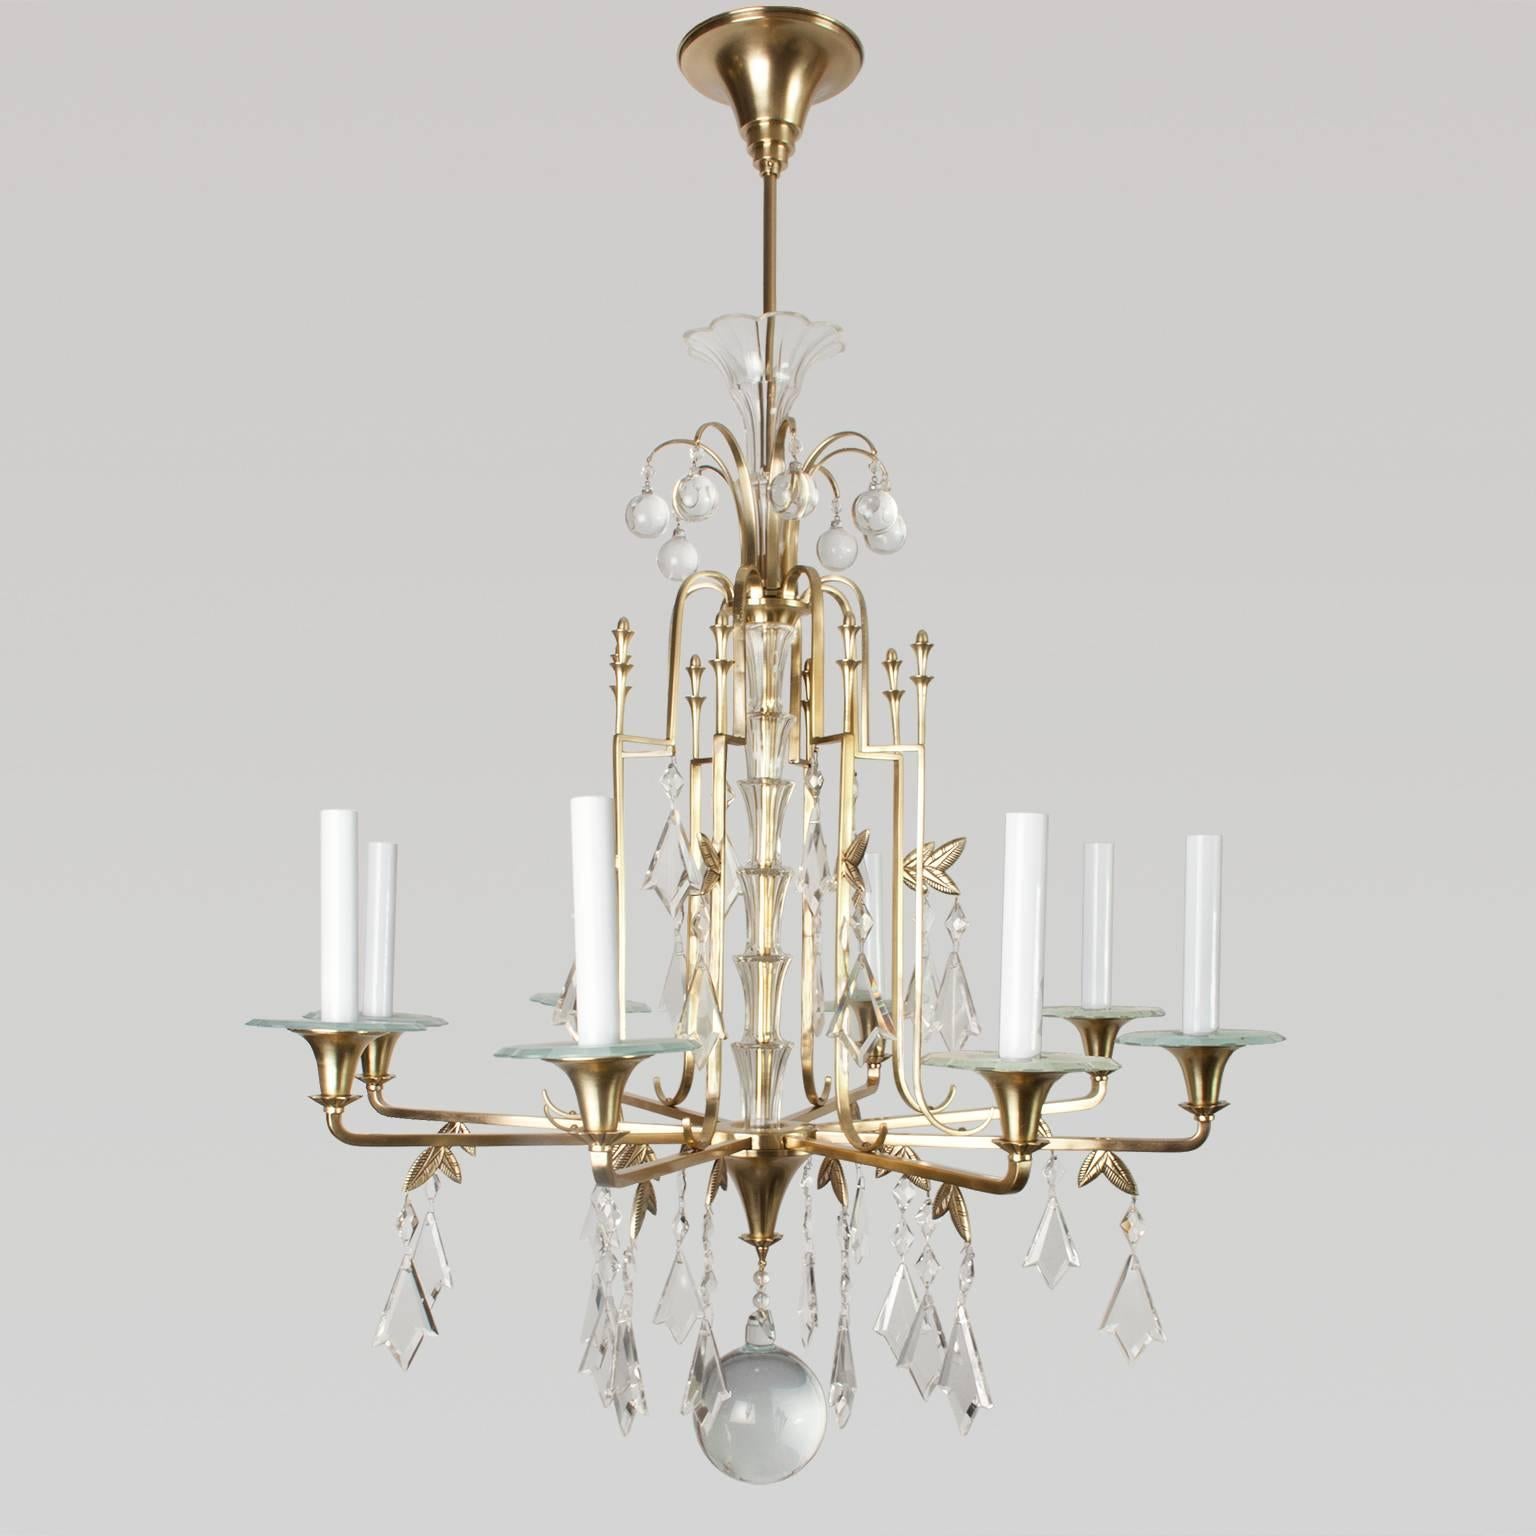 Fine Swedish Art Deco polished brass, eight-arm chandelier. The chandelier is in the form of a fountain with levels of crystals. The center stem has a stepped glass sleeve which follows to the canopy. A large solid glass crystal sphere is suspended